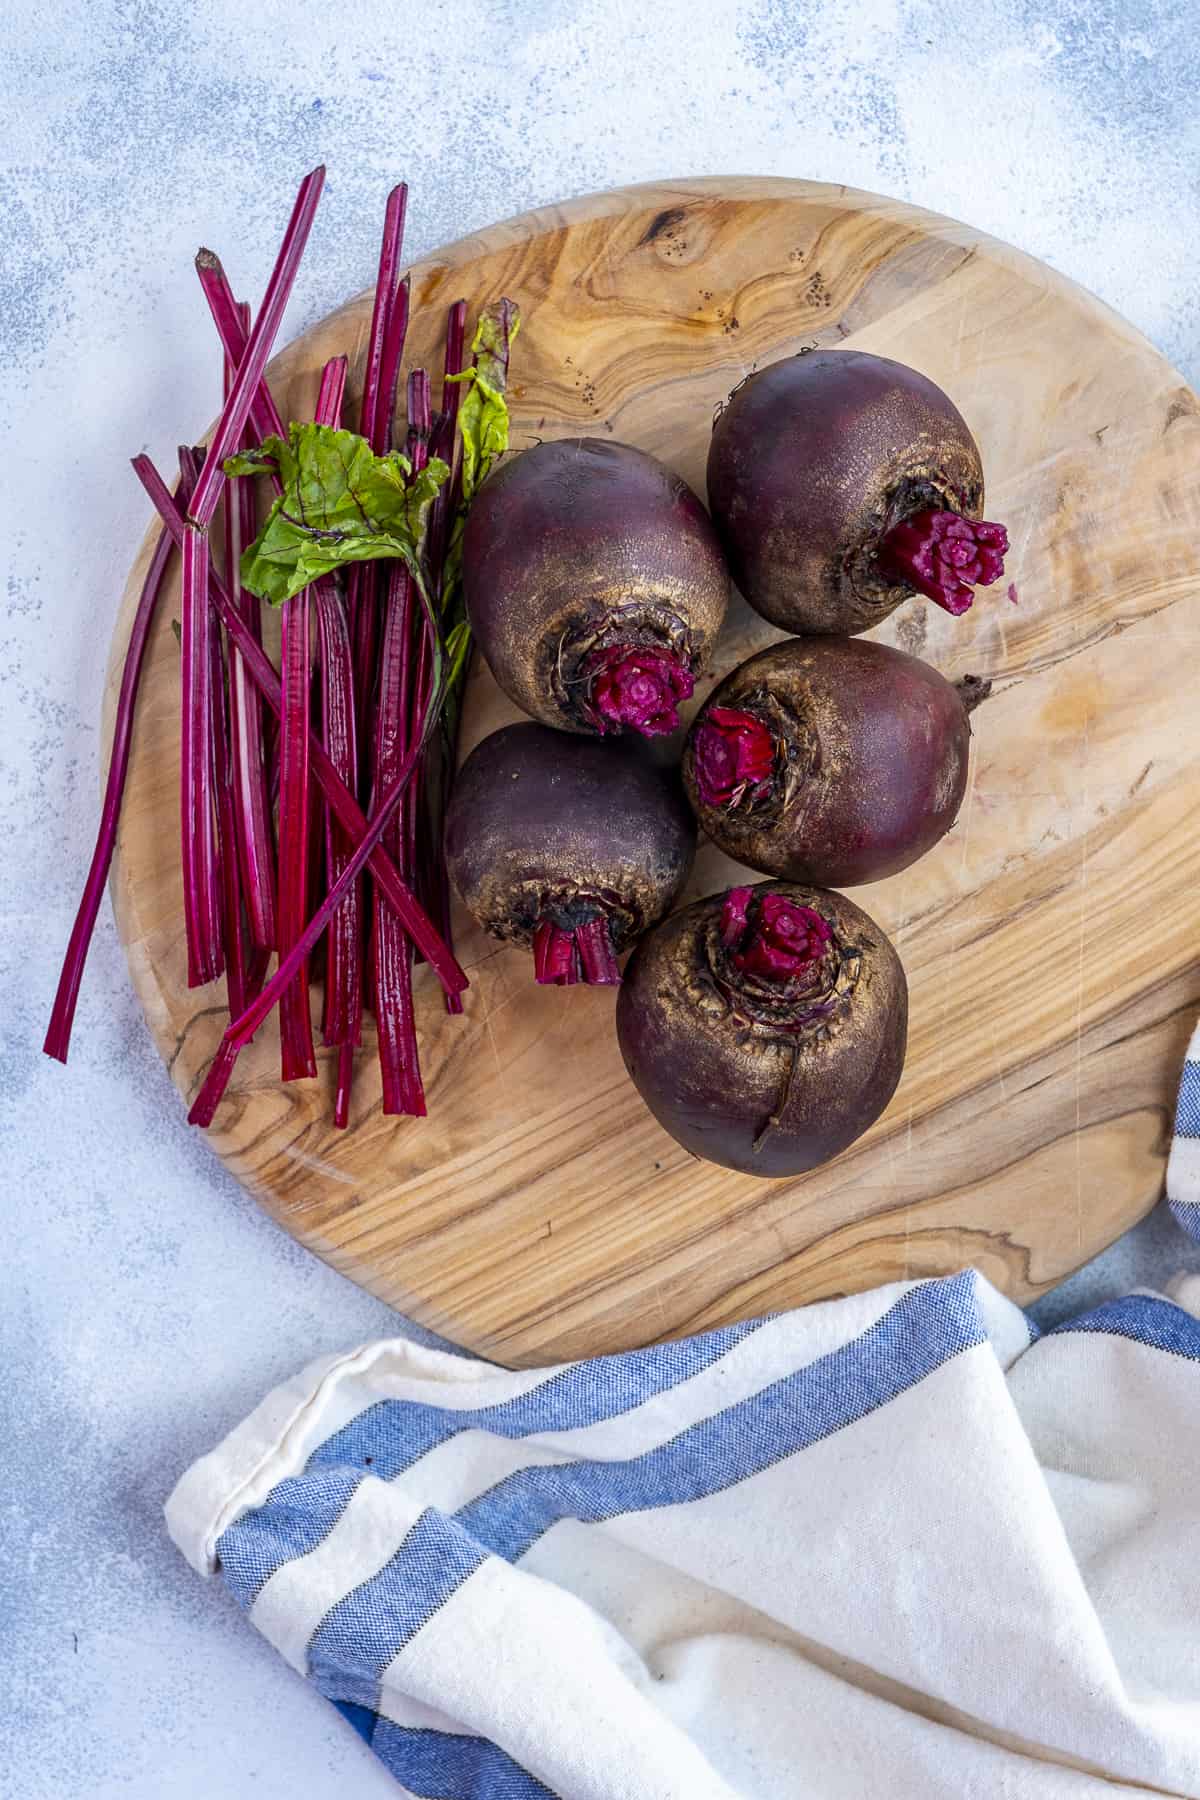 Raw beets on a wooden cutting board and their stems removed on the side.